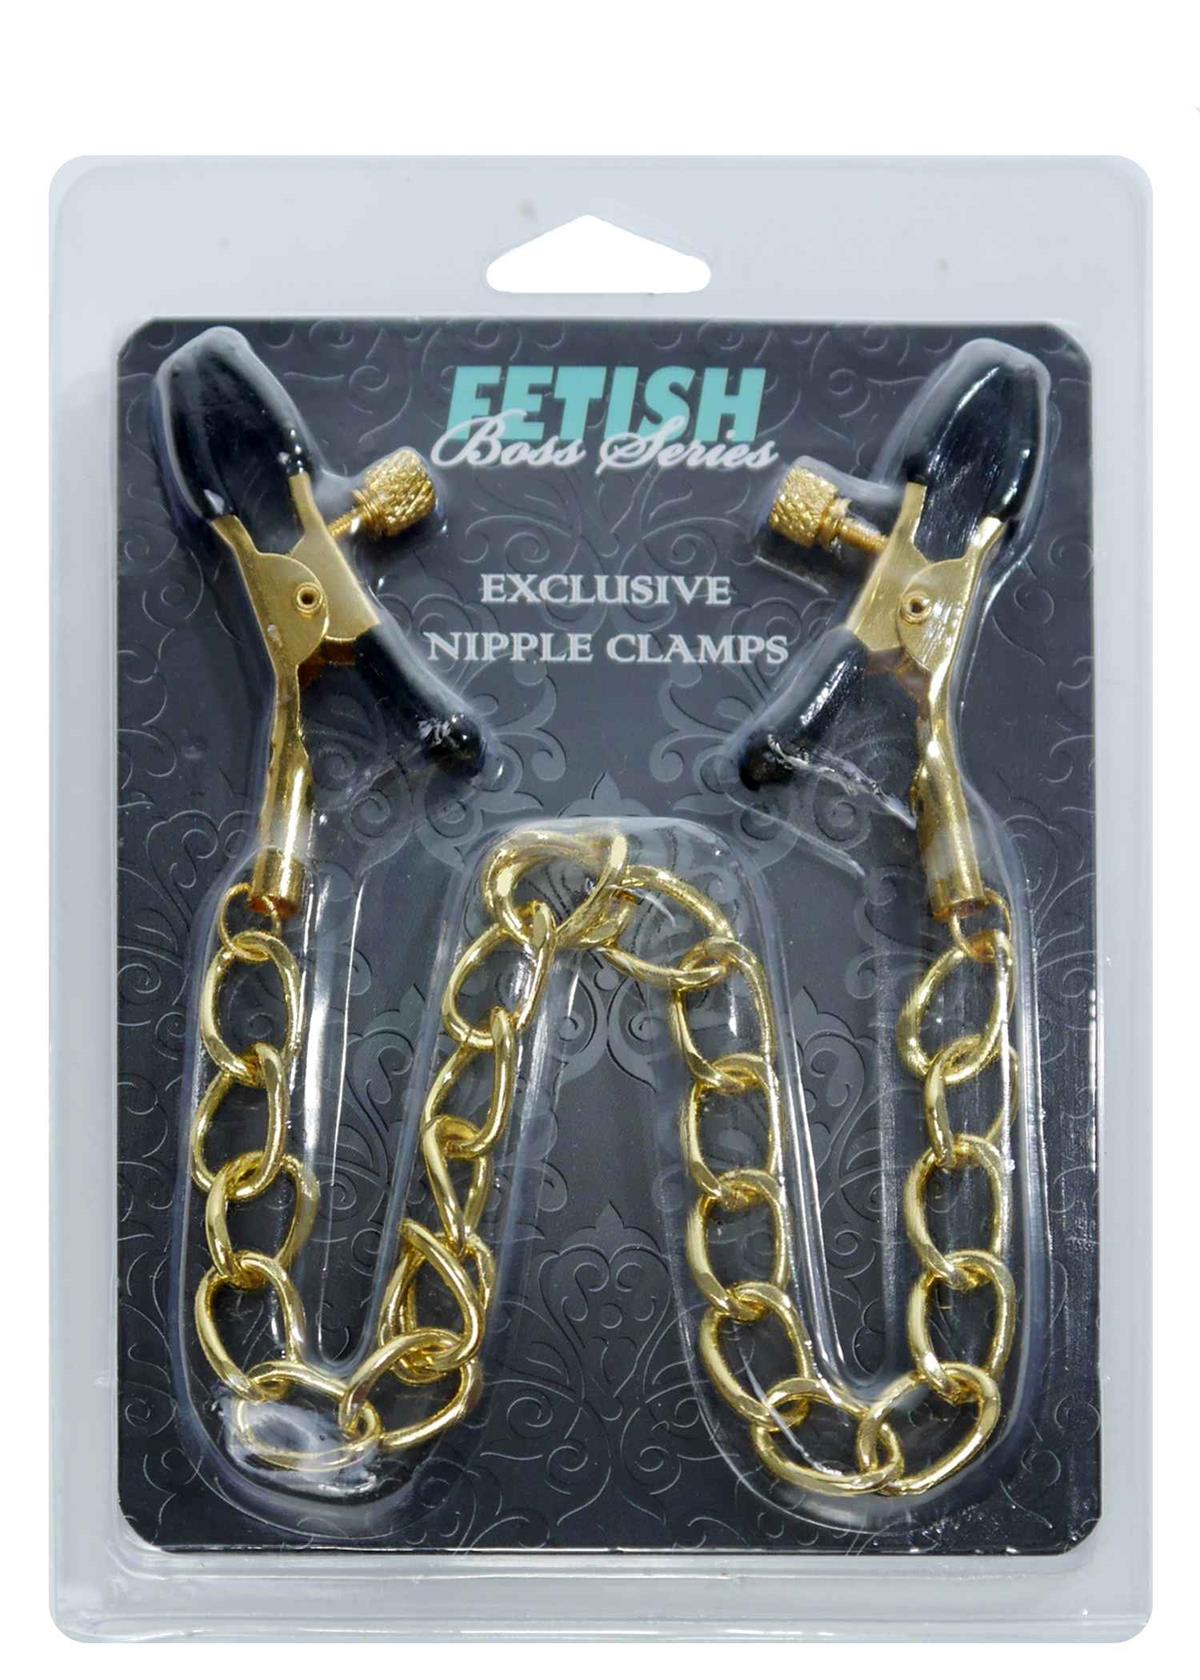 Bossoftoys - 61-00046 - Stimulator - Exclusive Nipple Clamps No. 16 - gold nipple chain clamps - Strong Blister